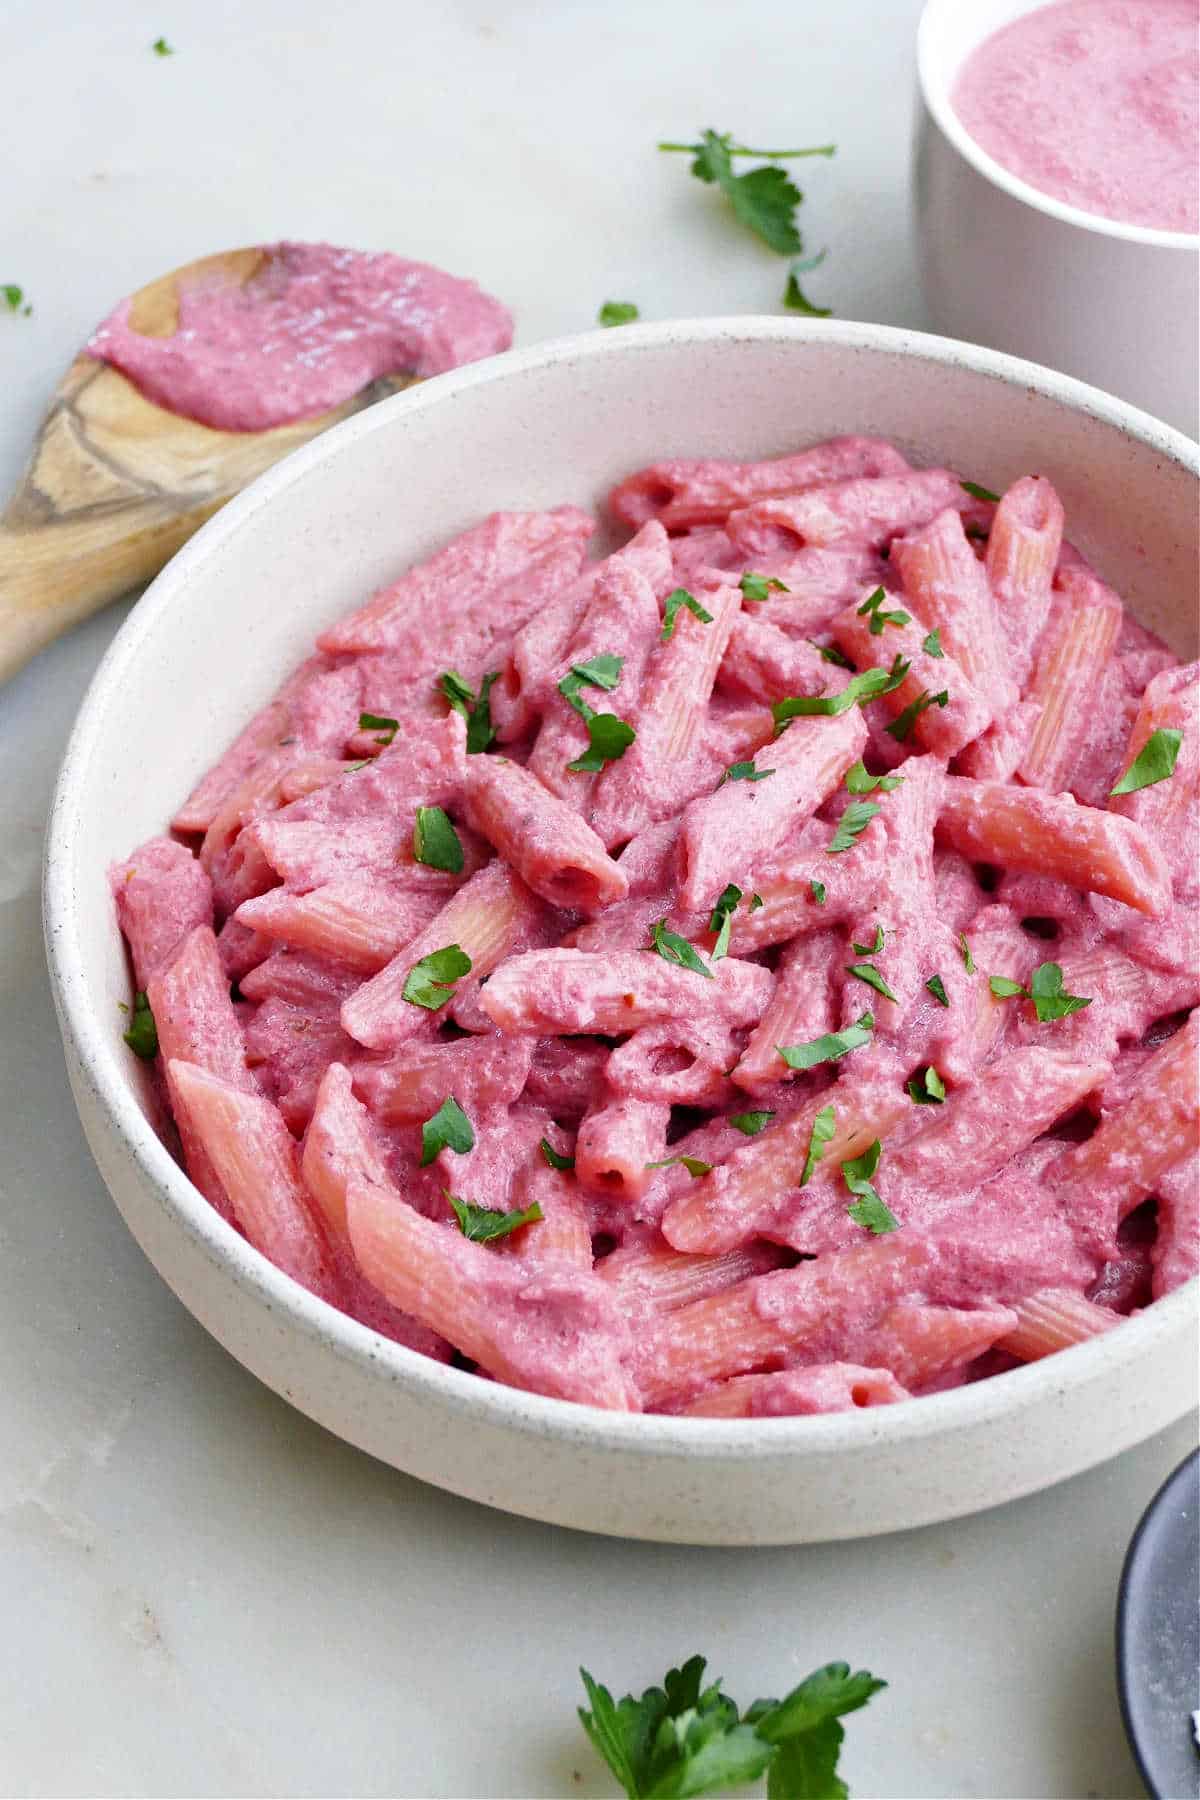 pasta tossed with blended beet sauce in a bowl topped with parsley